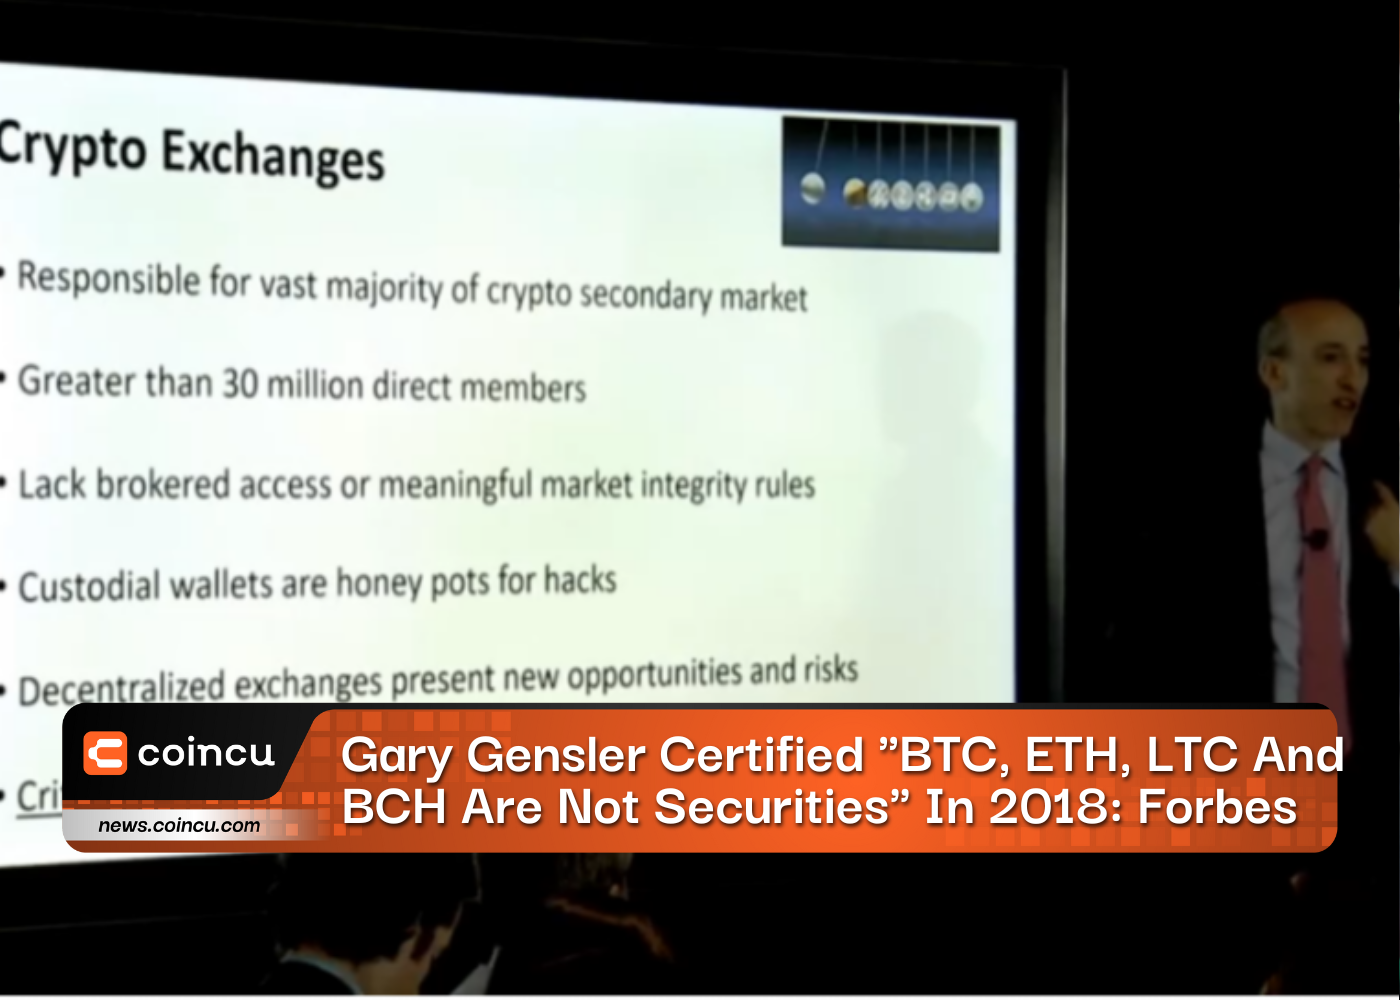 Gary Gensler Certified "BTC, ETH, LTC And BCH Are Not Securities" In 2018: Forbes